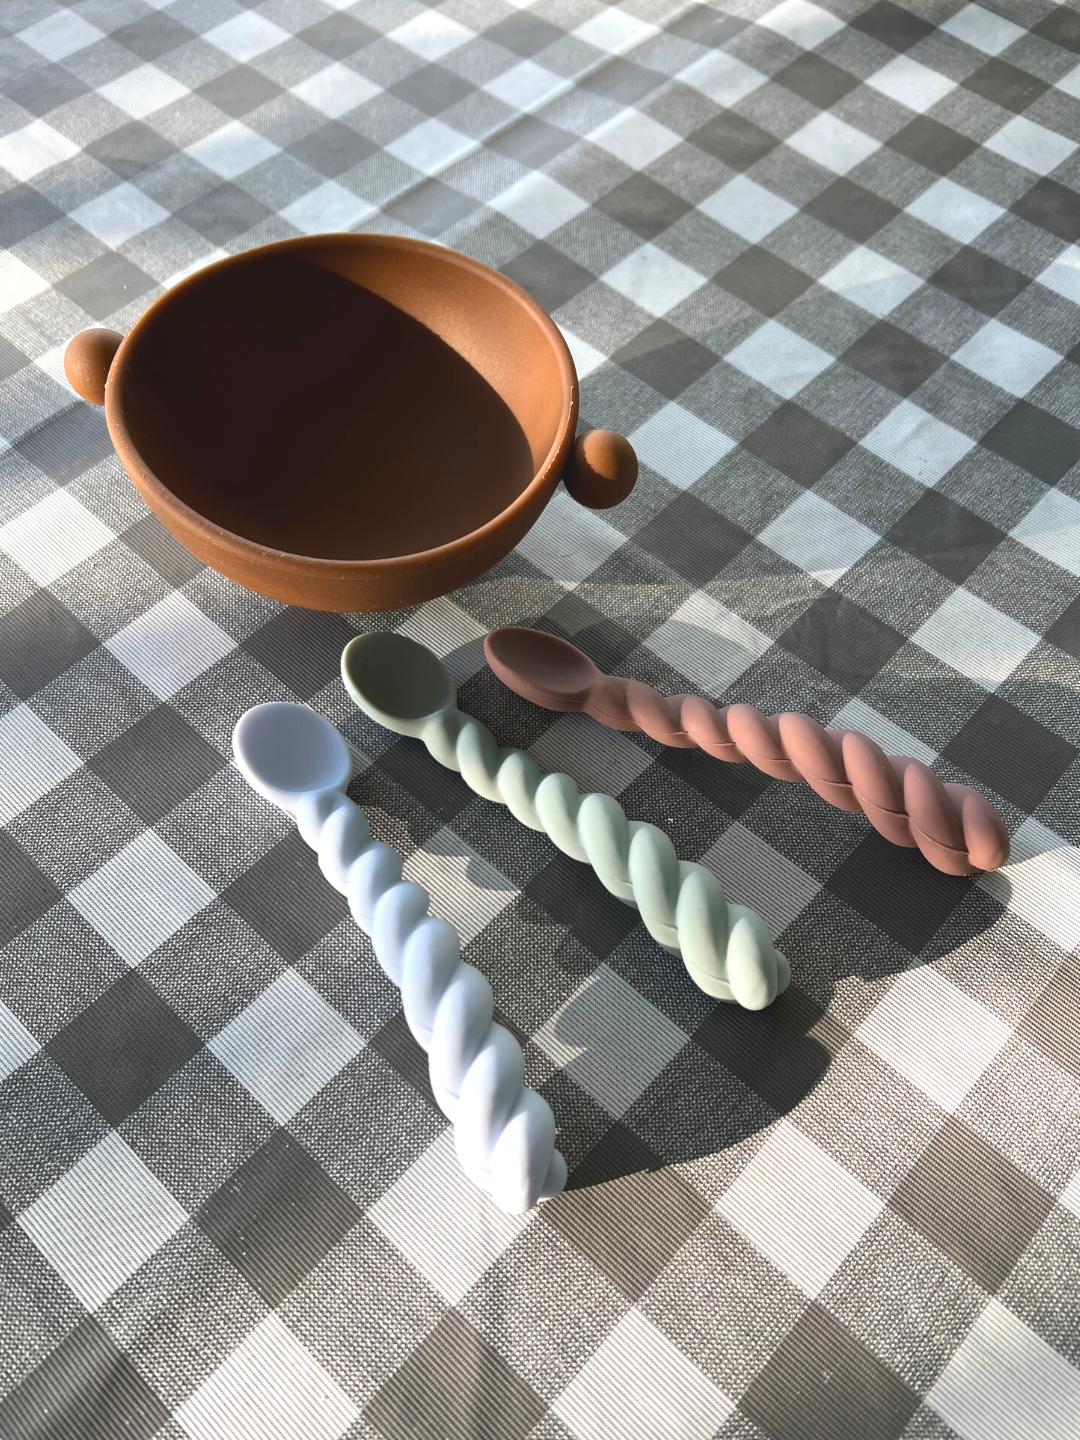 Three rubber kids spoons on table cloth next to a bowl